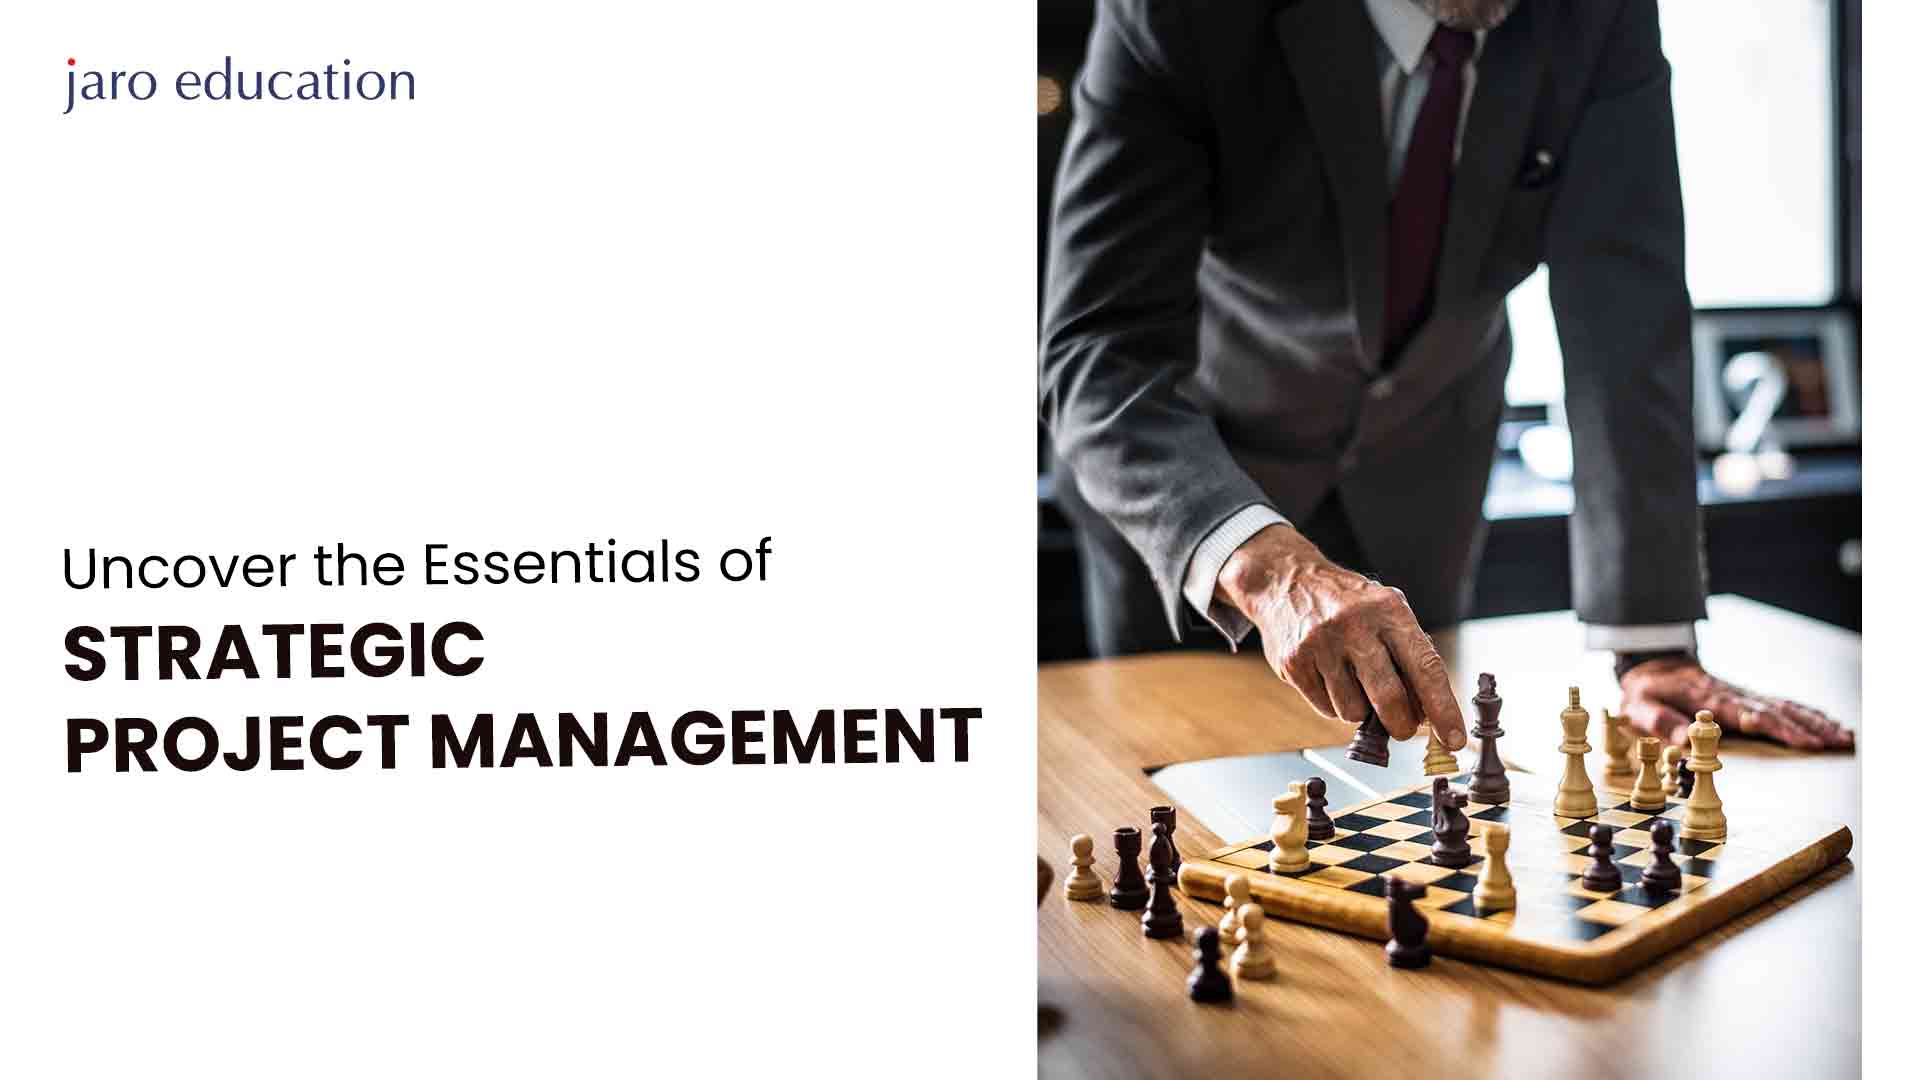 Uncover the Essentials of Strategic Project Management